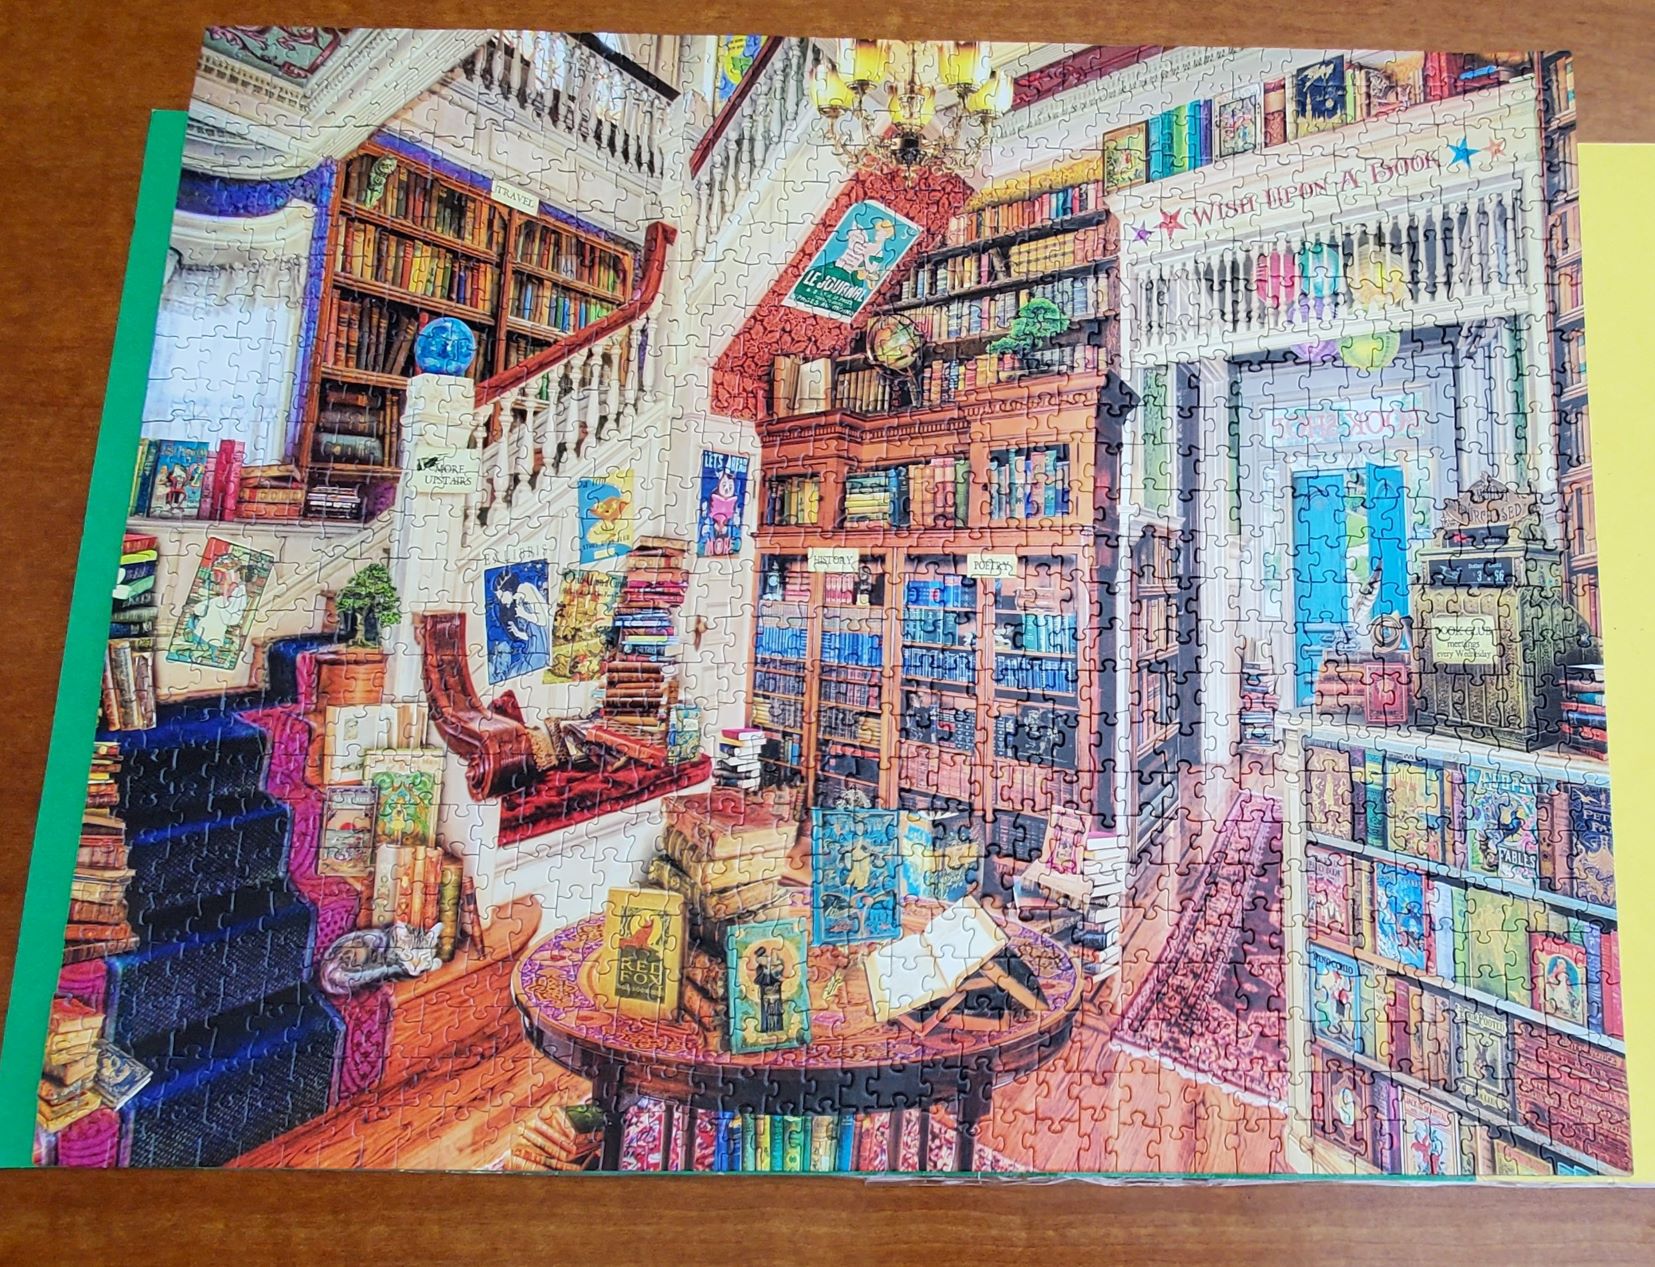 Completed jigsaw puzzle of interior of bookstore with books on shelves, tables, and stairs. There are cats hidden among the books.